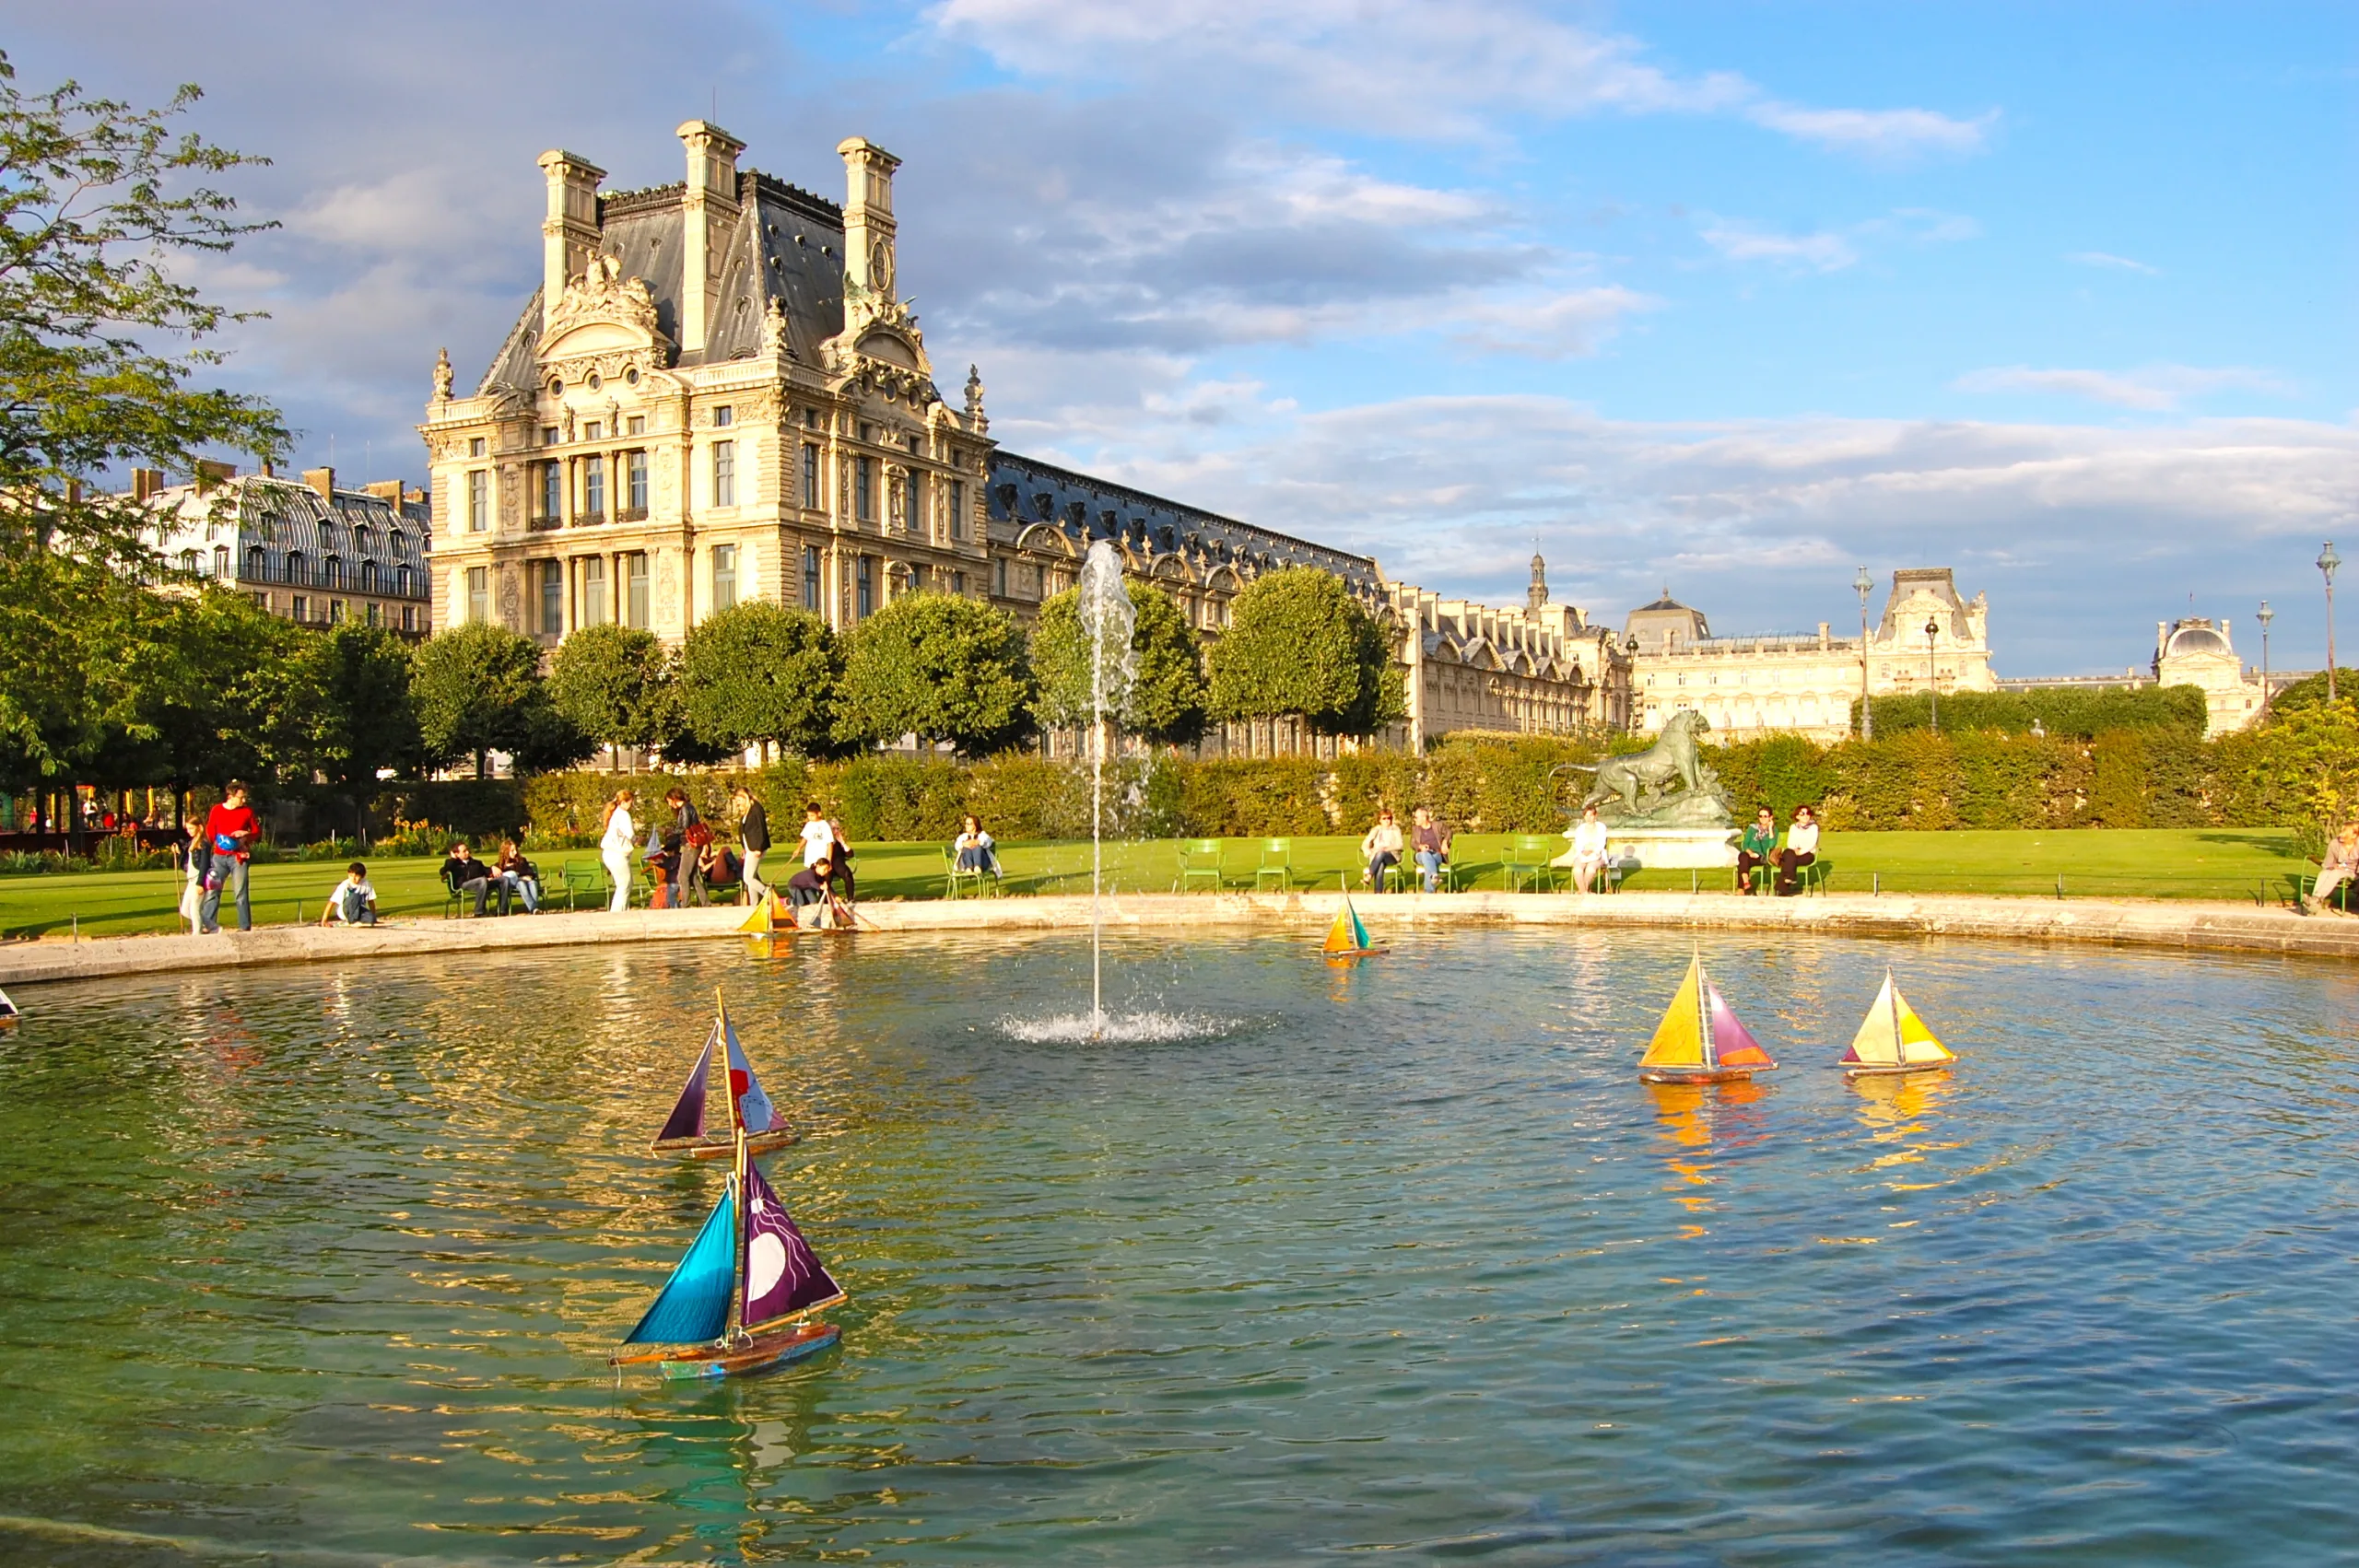 Children playing with sail boats on the lake in Tuilleries gardens, Paris